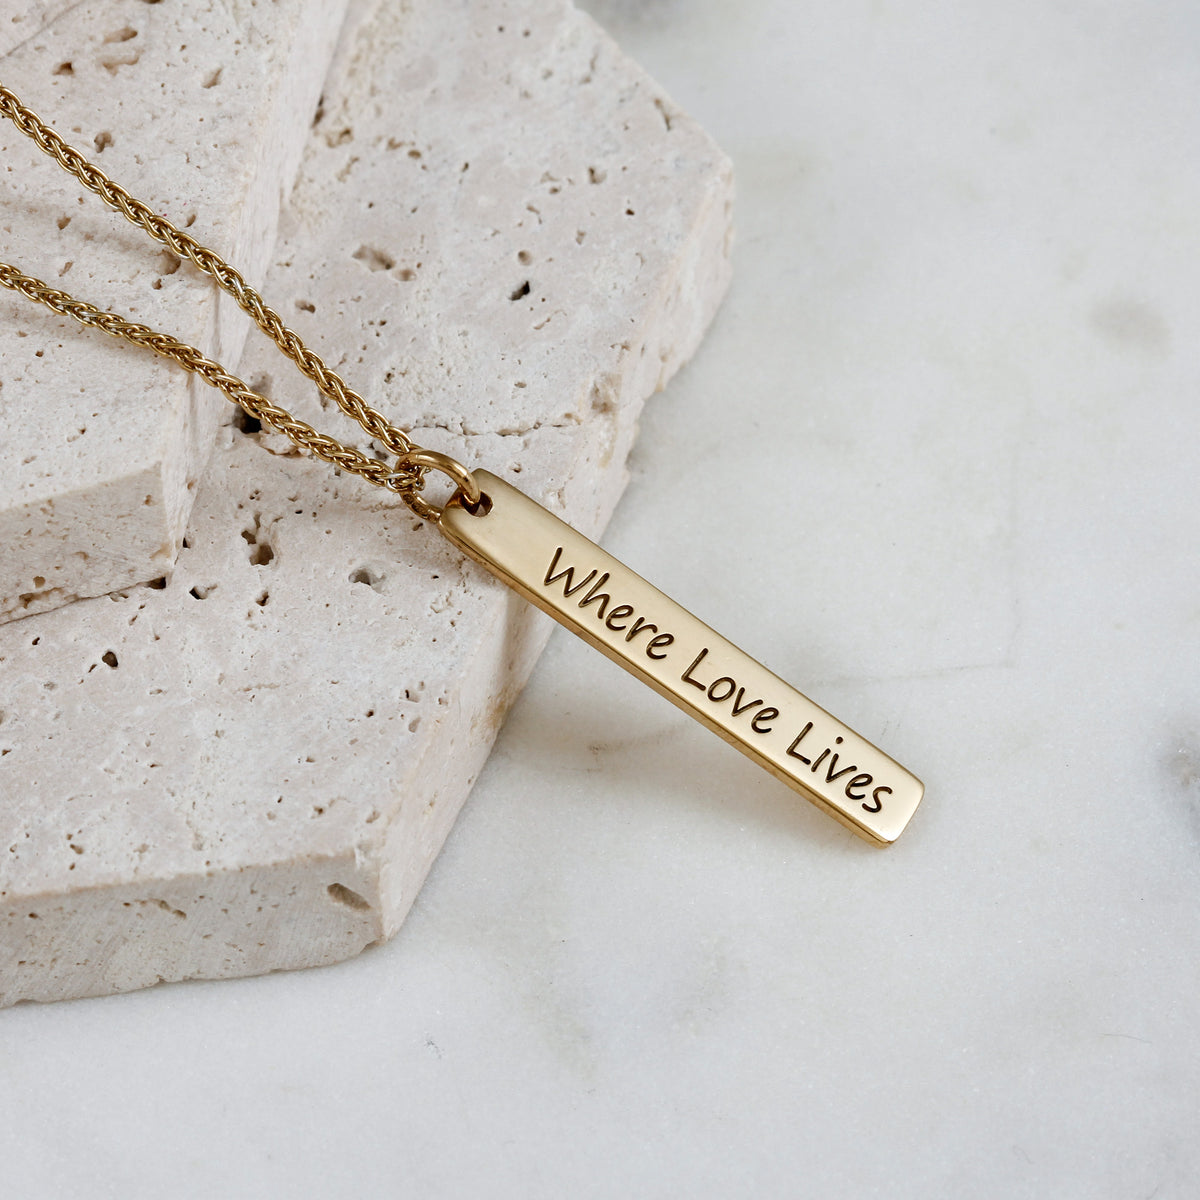 gold plated silver tag necklace with personalised message